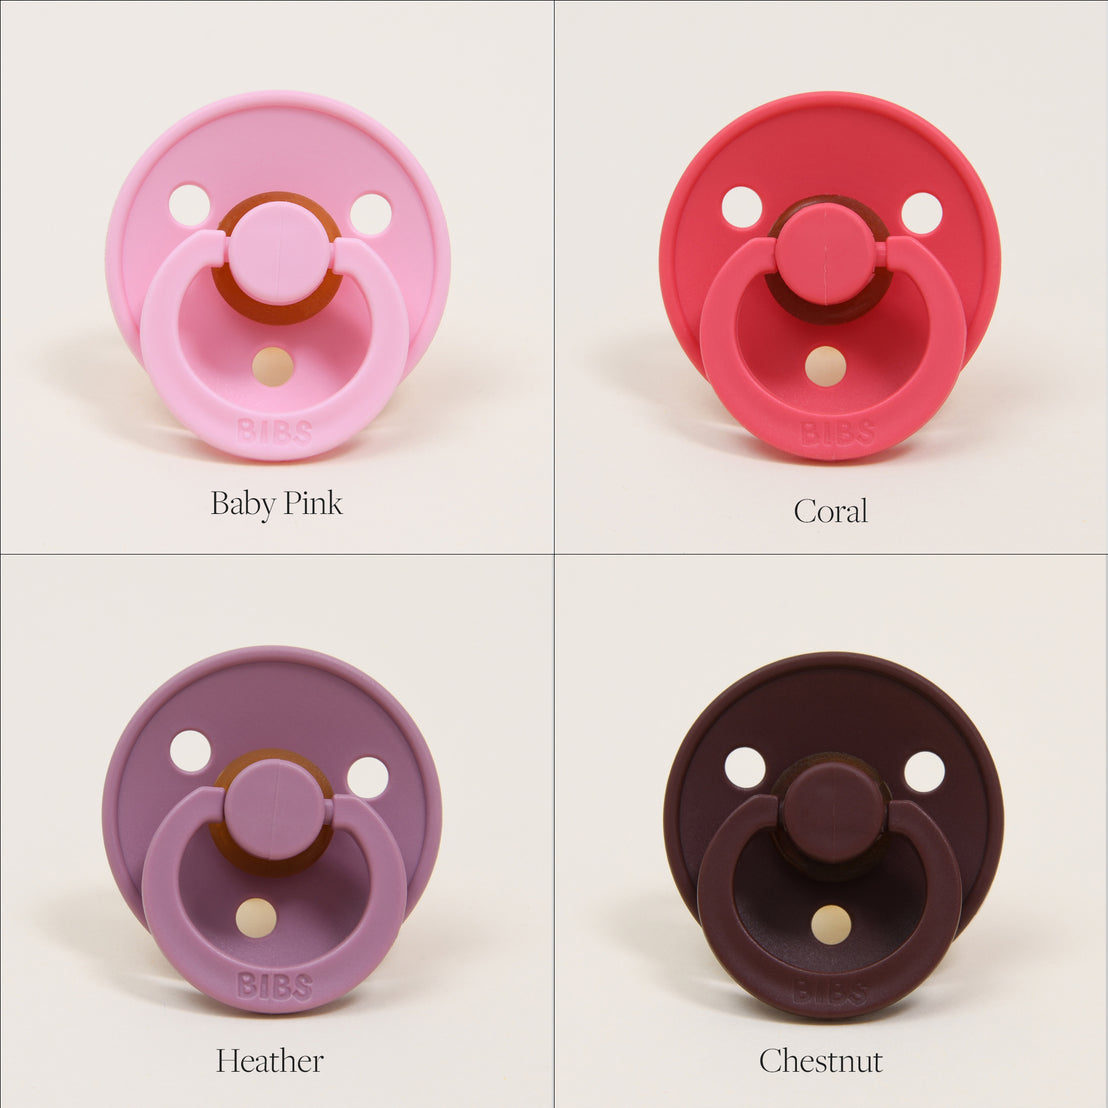 Four Bibs Pacifiers in different colors labeled individually: baby pink, coral, heather, and chestnut, each displayed against a solid, light background. These are natural rubber baby pacifiers designed in Denmark.